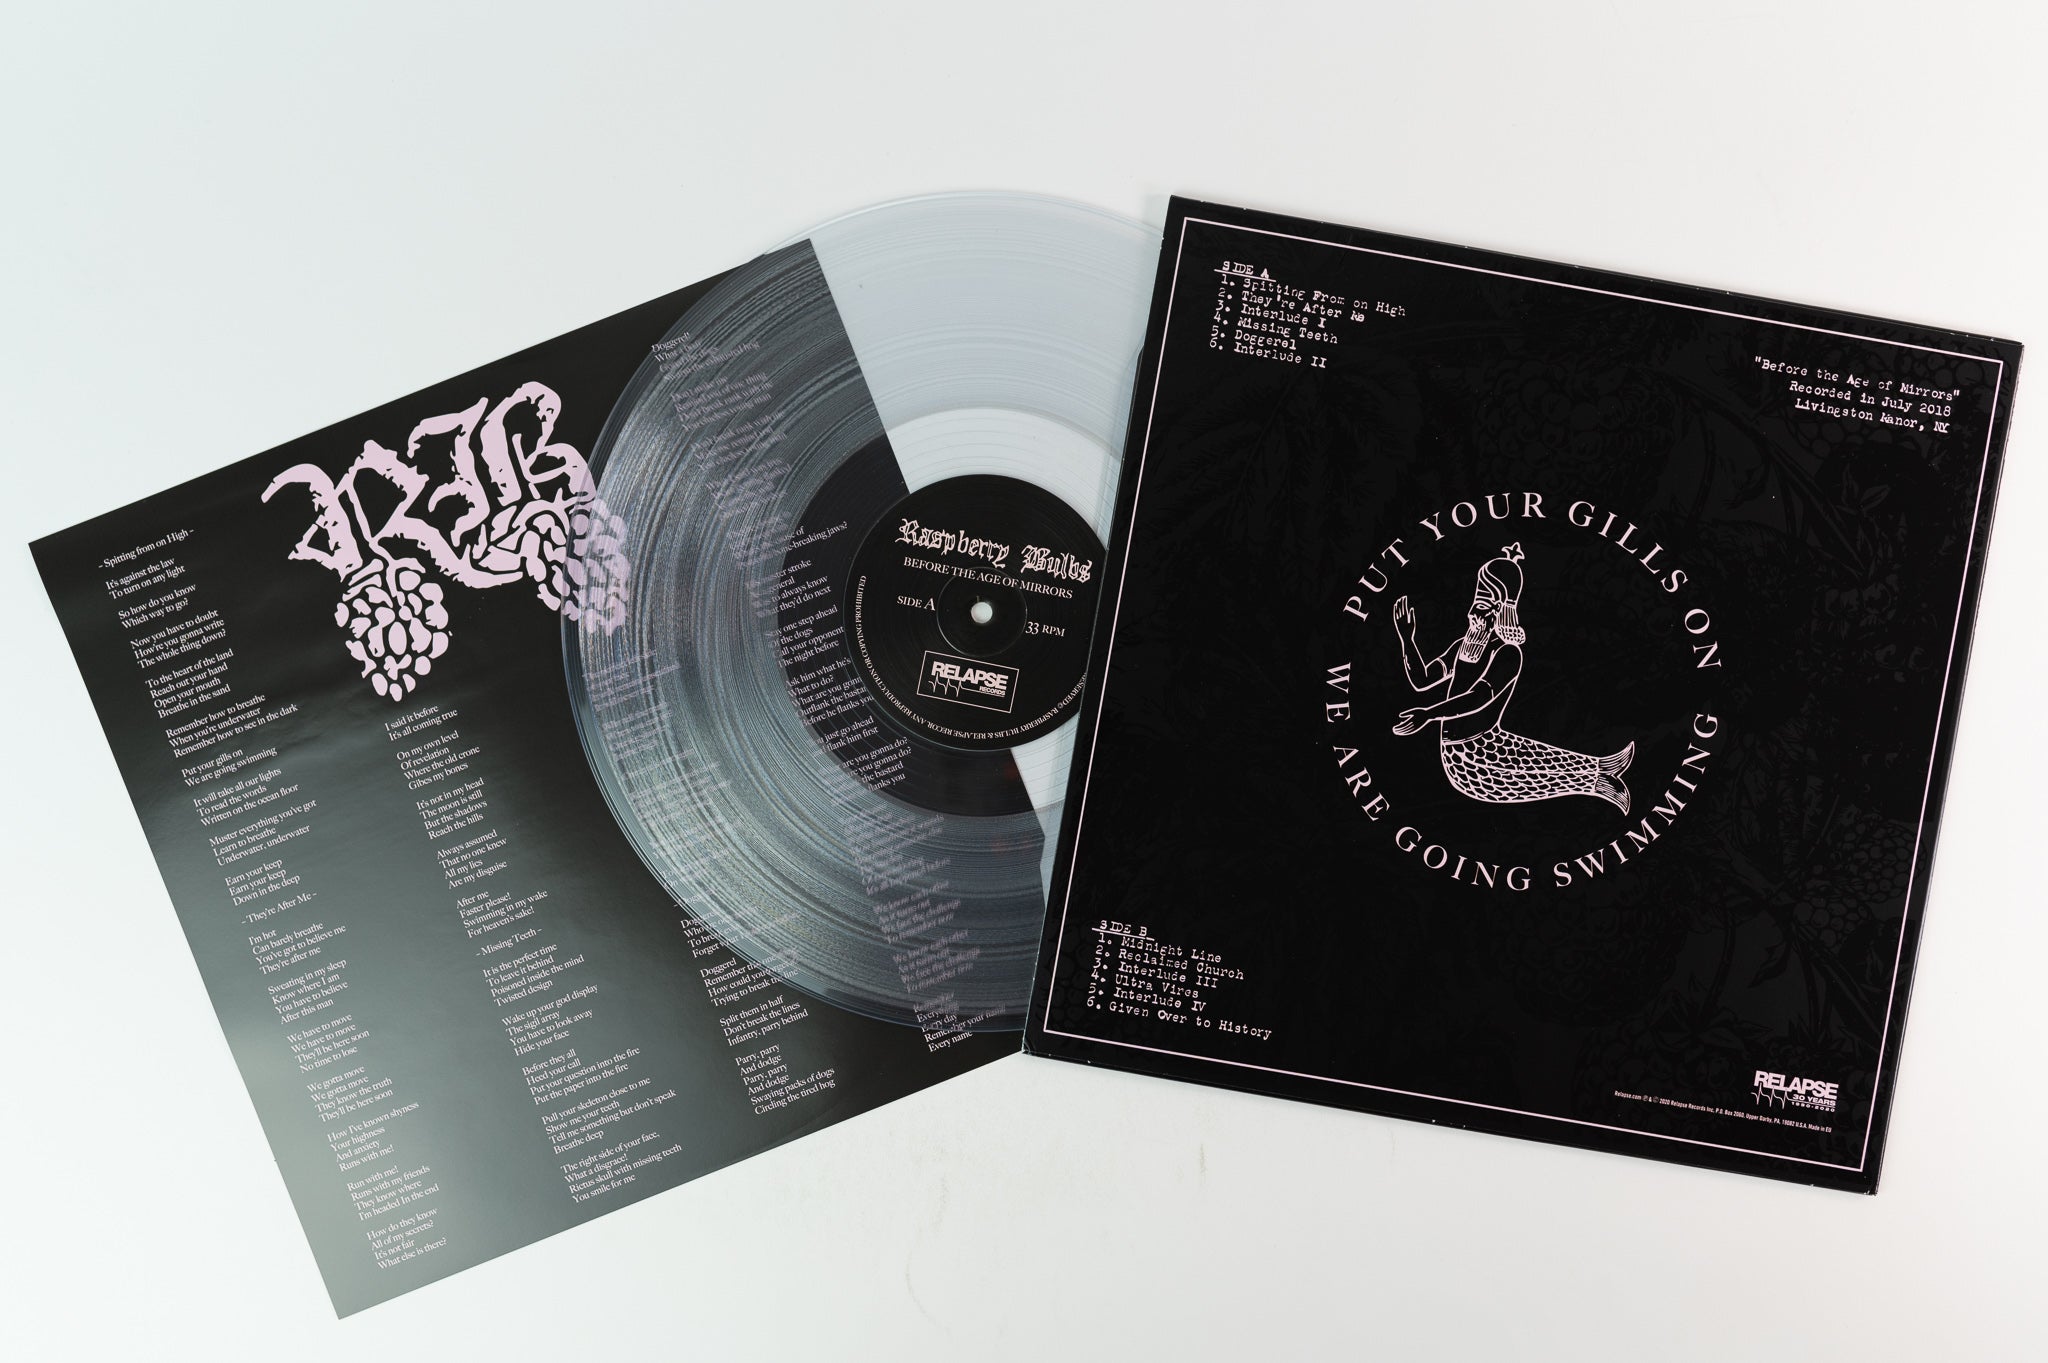 Raspberry Bulbs - Before The Age Of Mirrors on Relapse Clear Vinyl